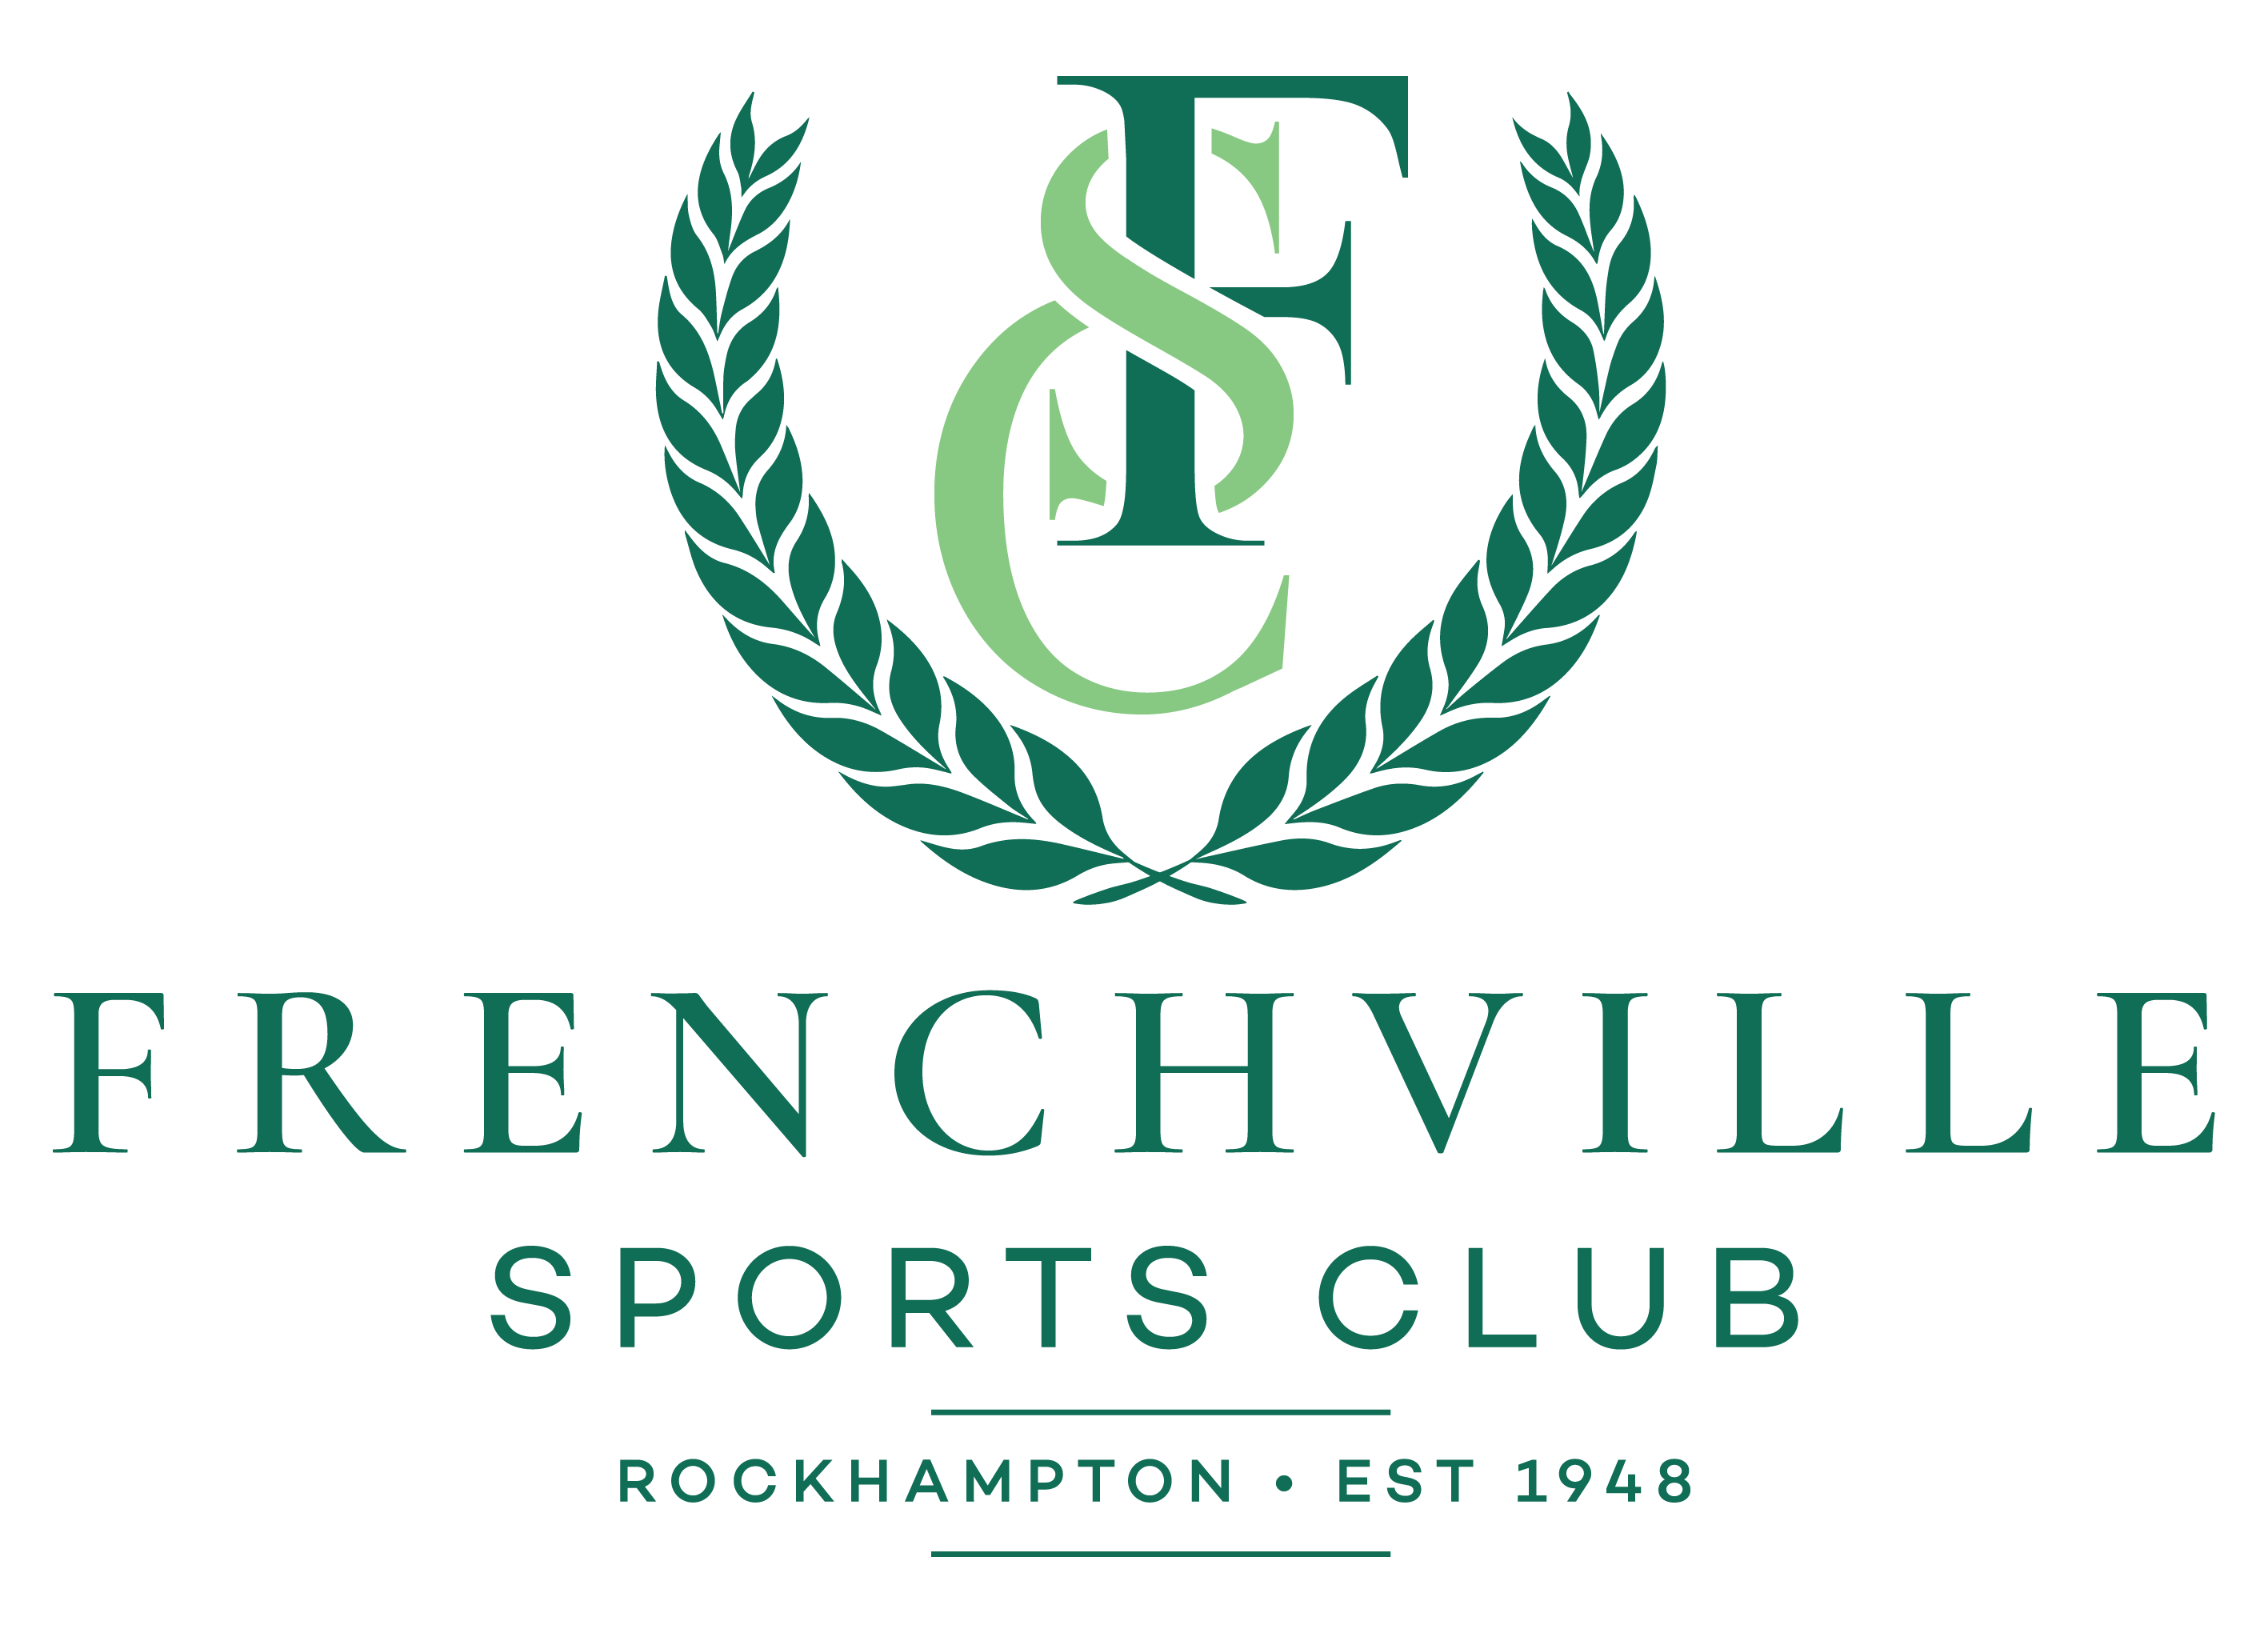 Frenchville Sports Club • Since 1948 - Frenchville Sports Club